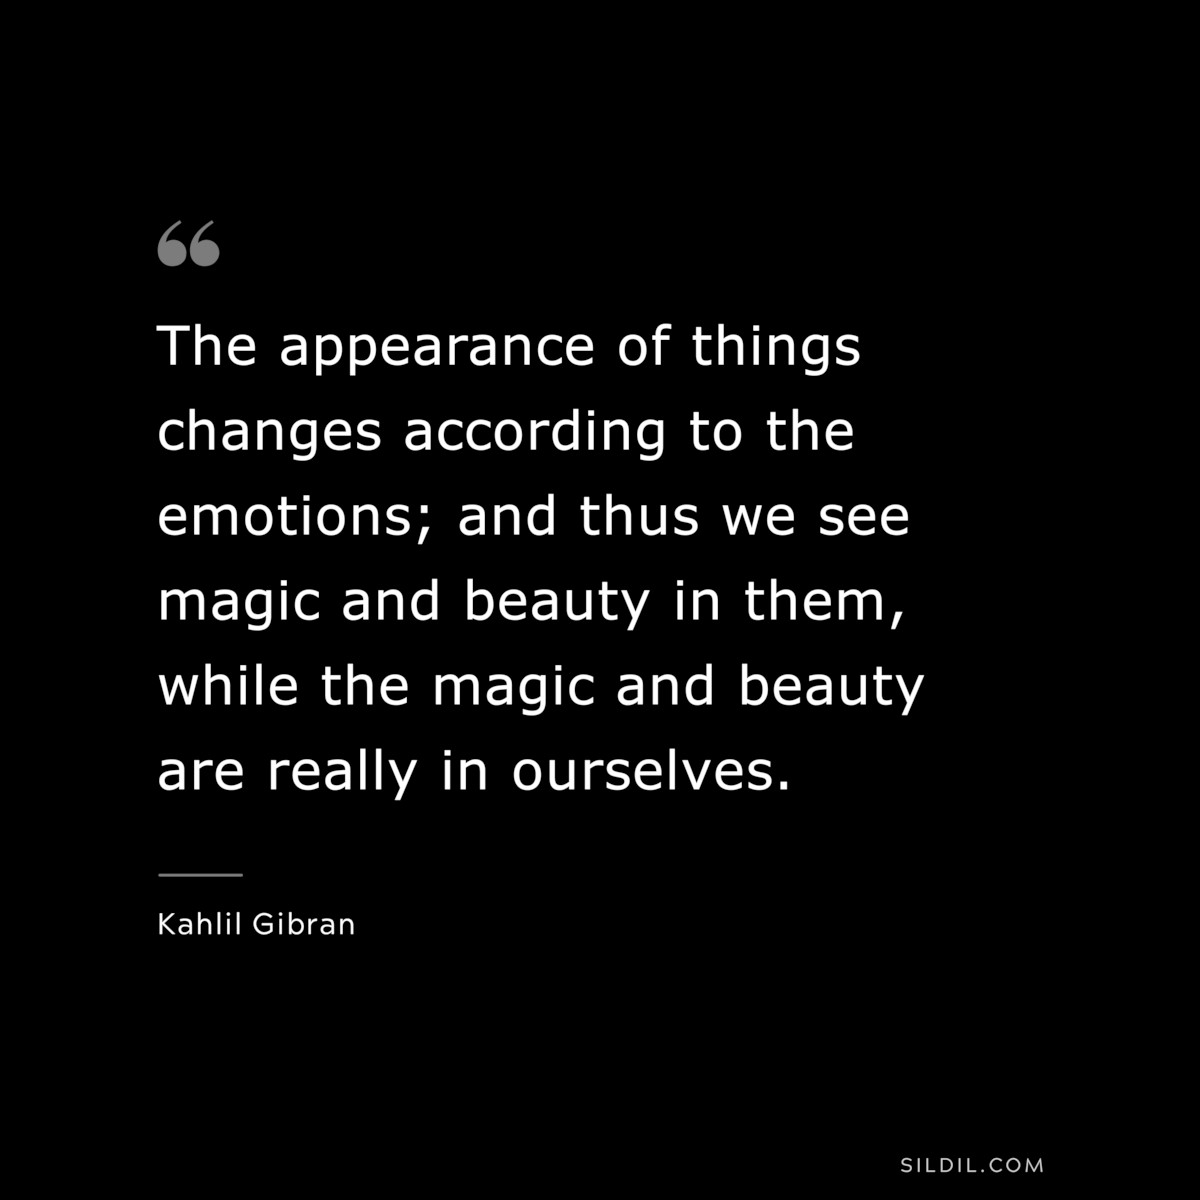 The appearance of things changes according to the emotions; and thus we see magic and beauty in them, while the magic and beauty are really in ourselves. ― Kahlil Gibran